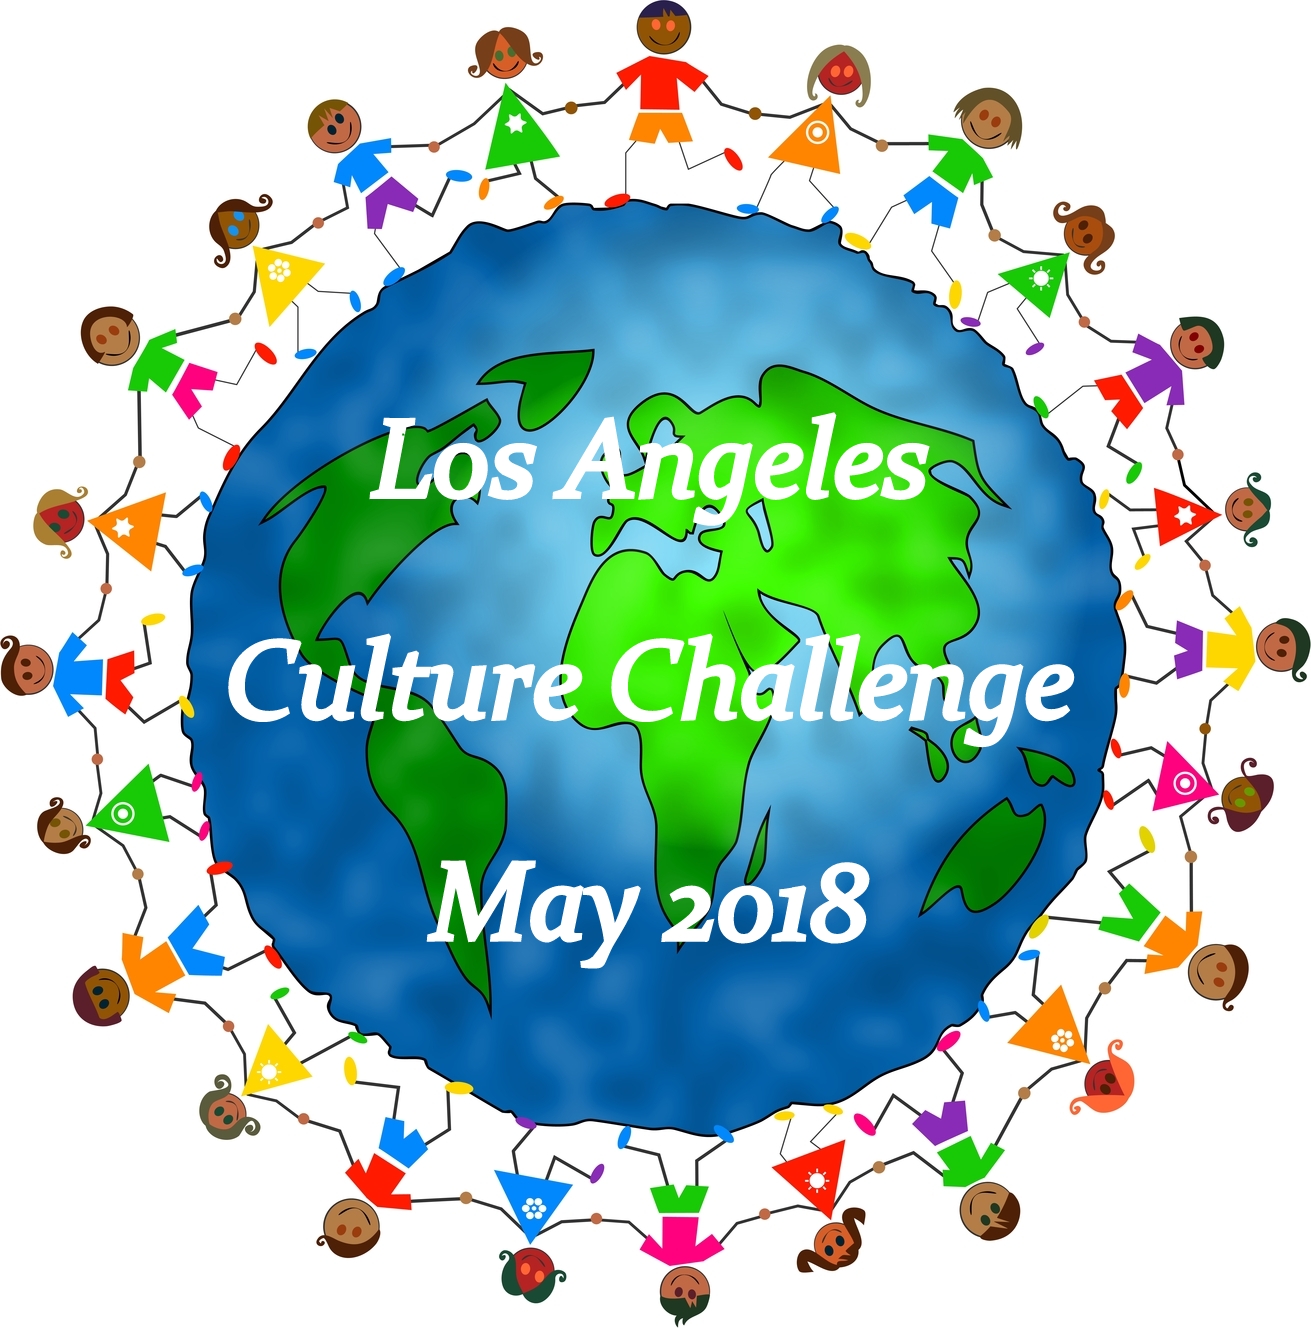 los-angeles-culture-challenge-may-2018-17th-of-may-celebrations-la